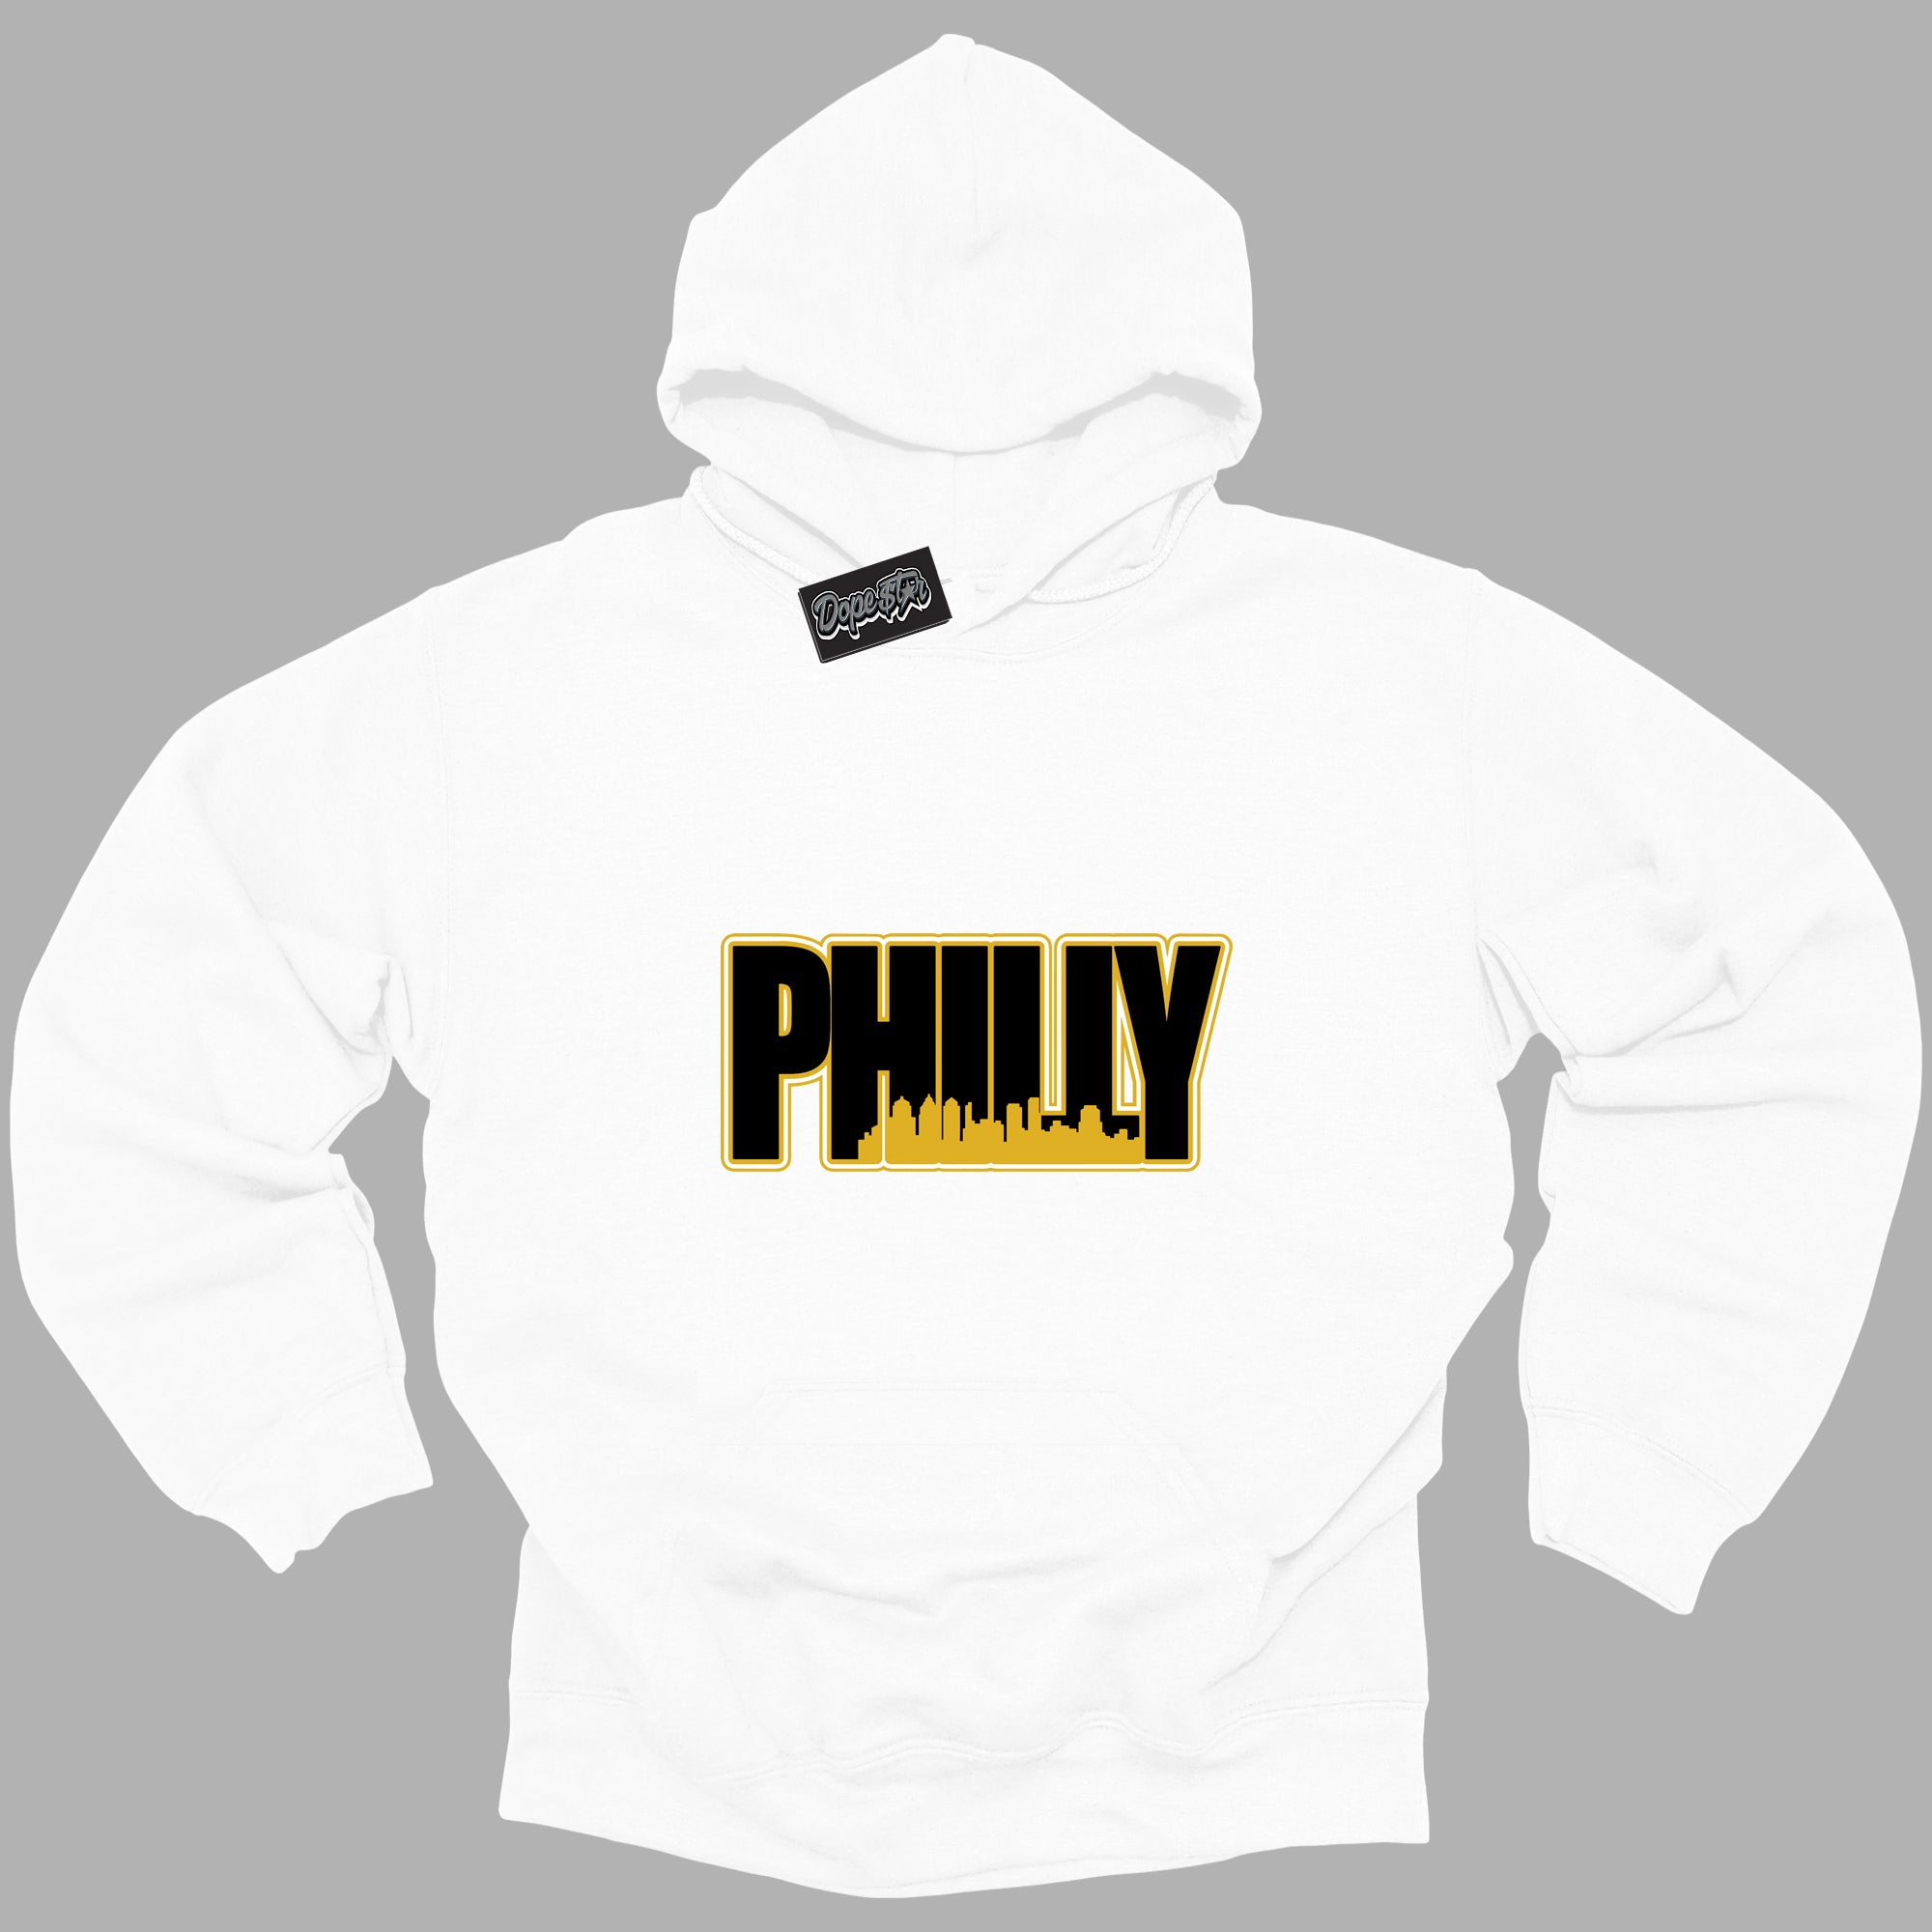 Cool White Hoodie with “ Philly ”  design that Perfectly Matches Yellow Ochre 6s Sneakers.